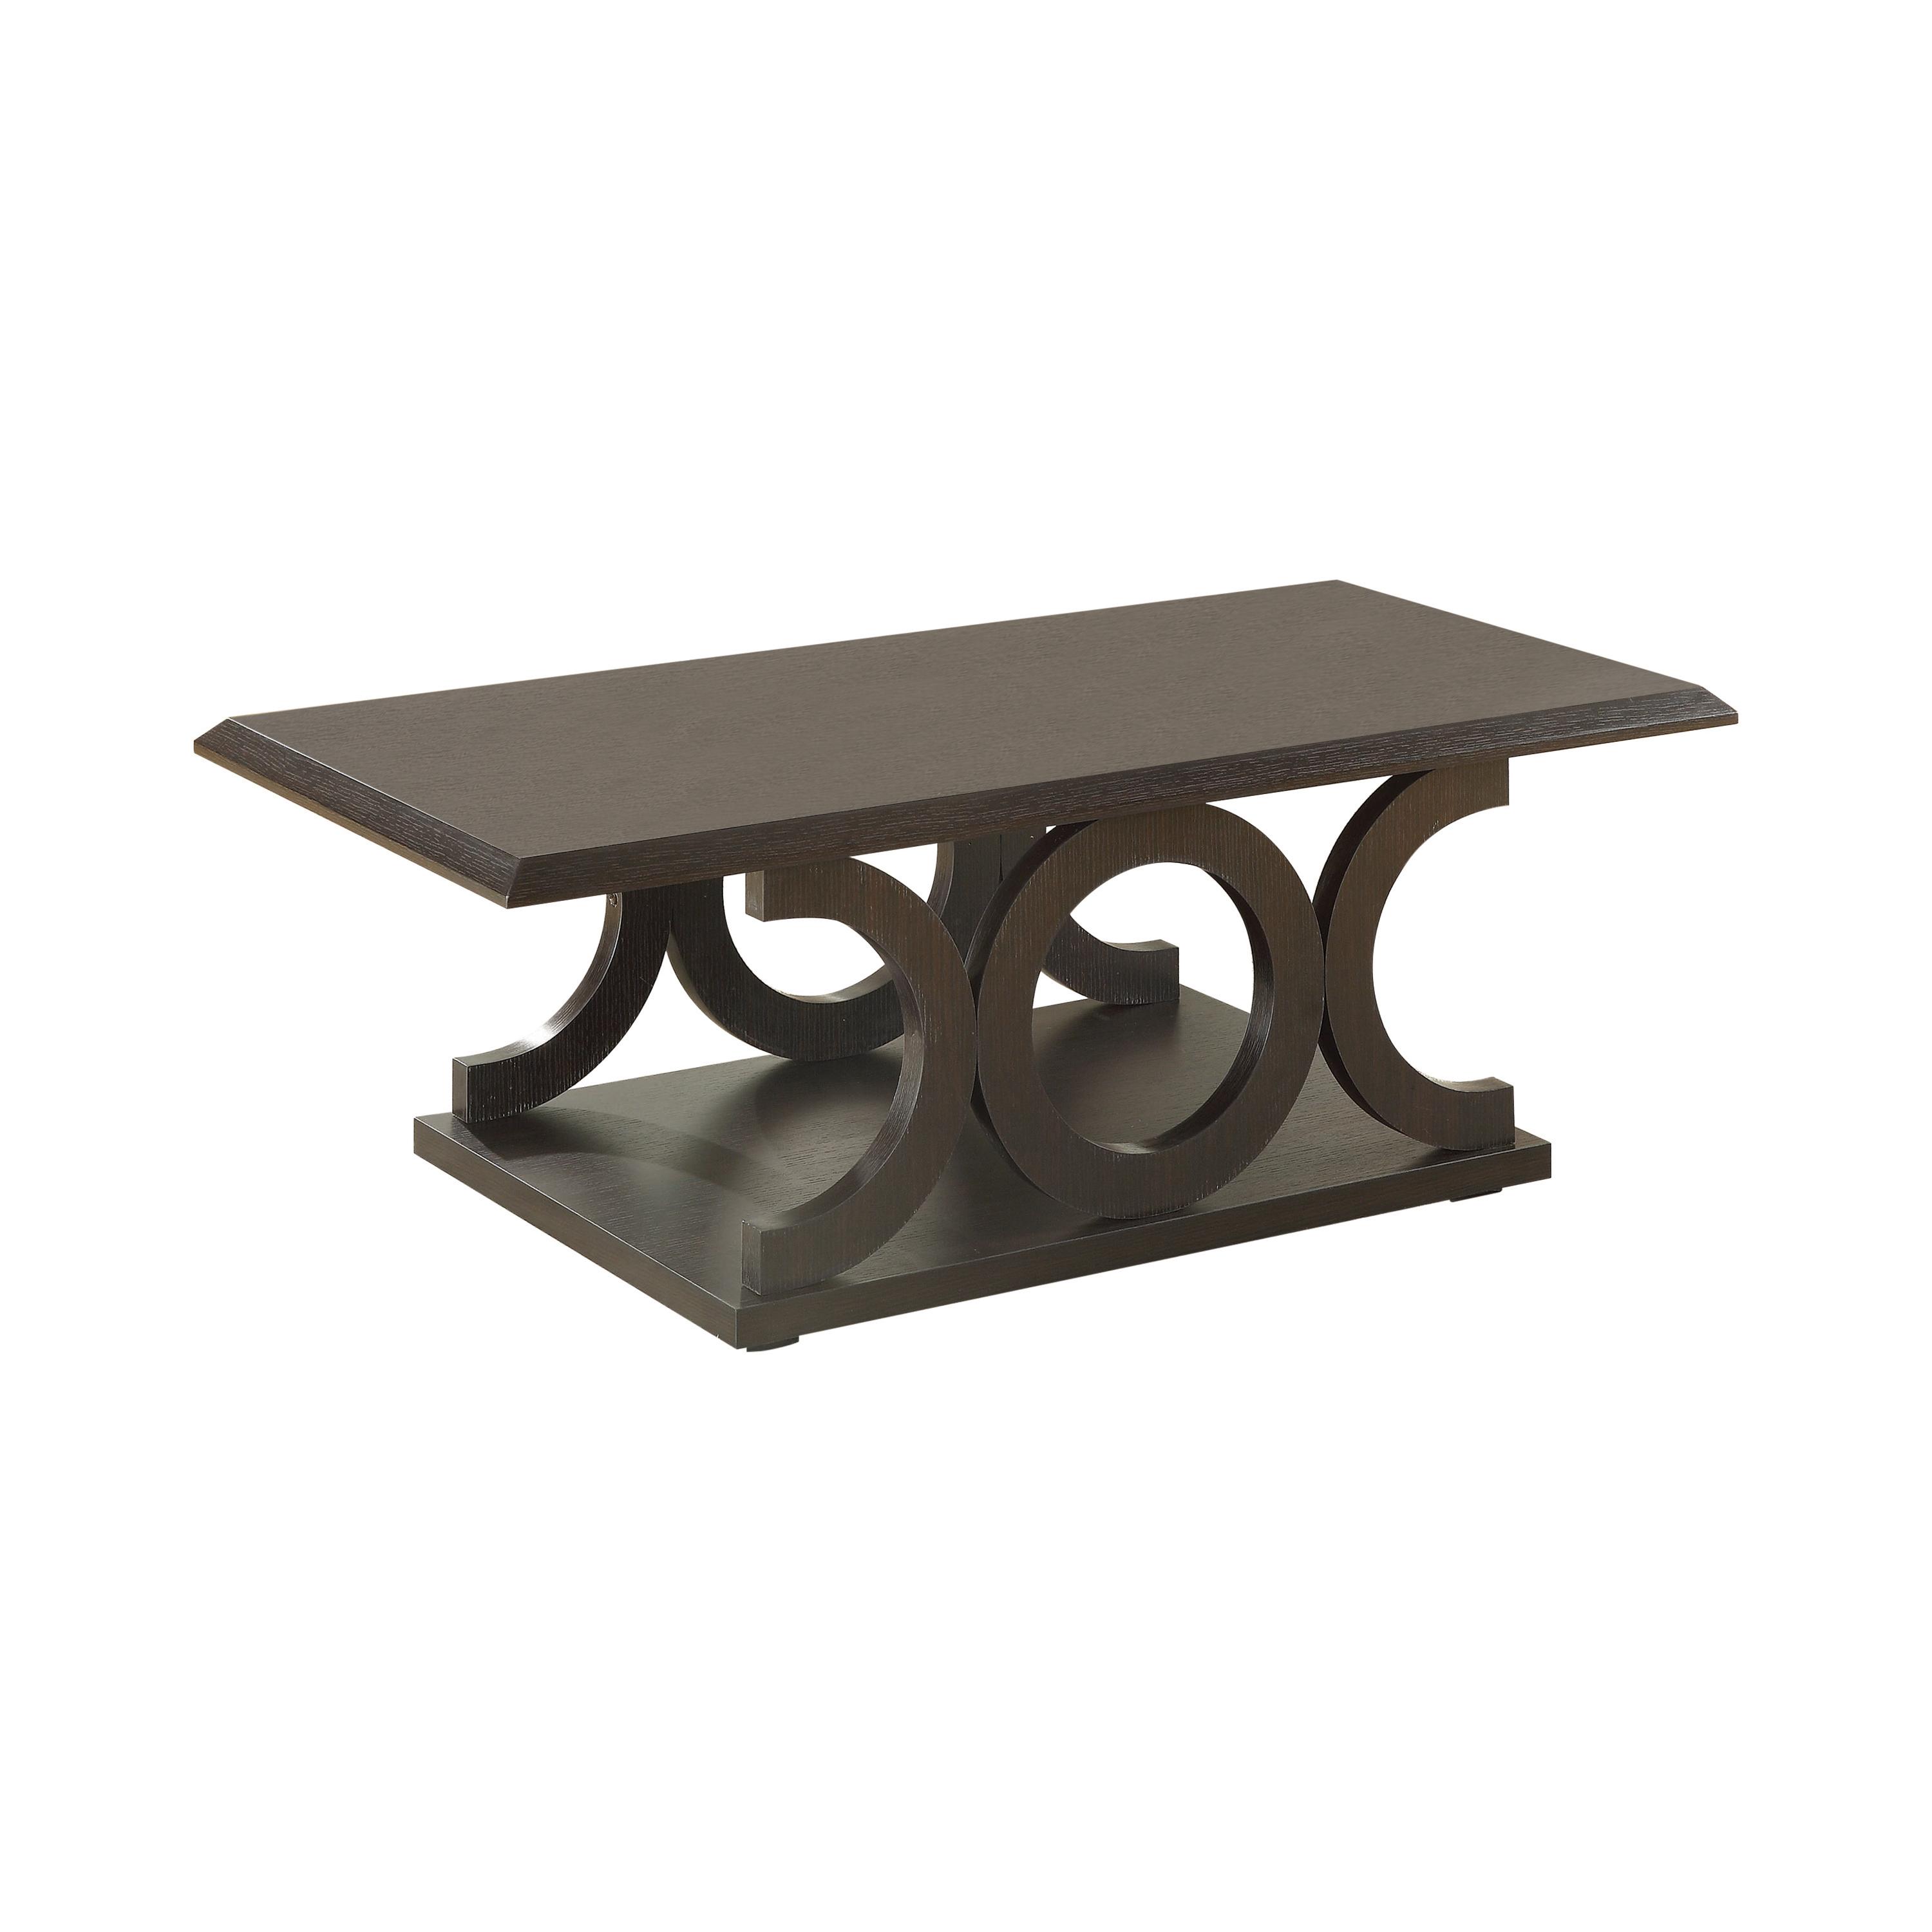 Transitional Coffee Table 703148 703148 in Cappuccino 